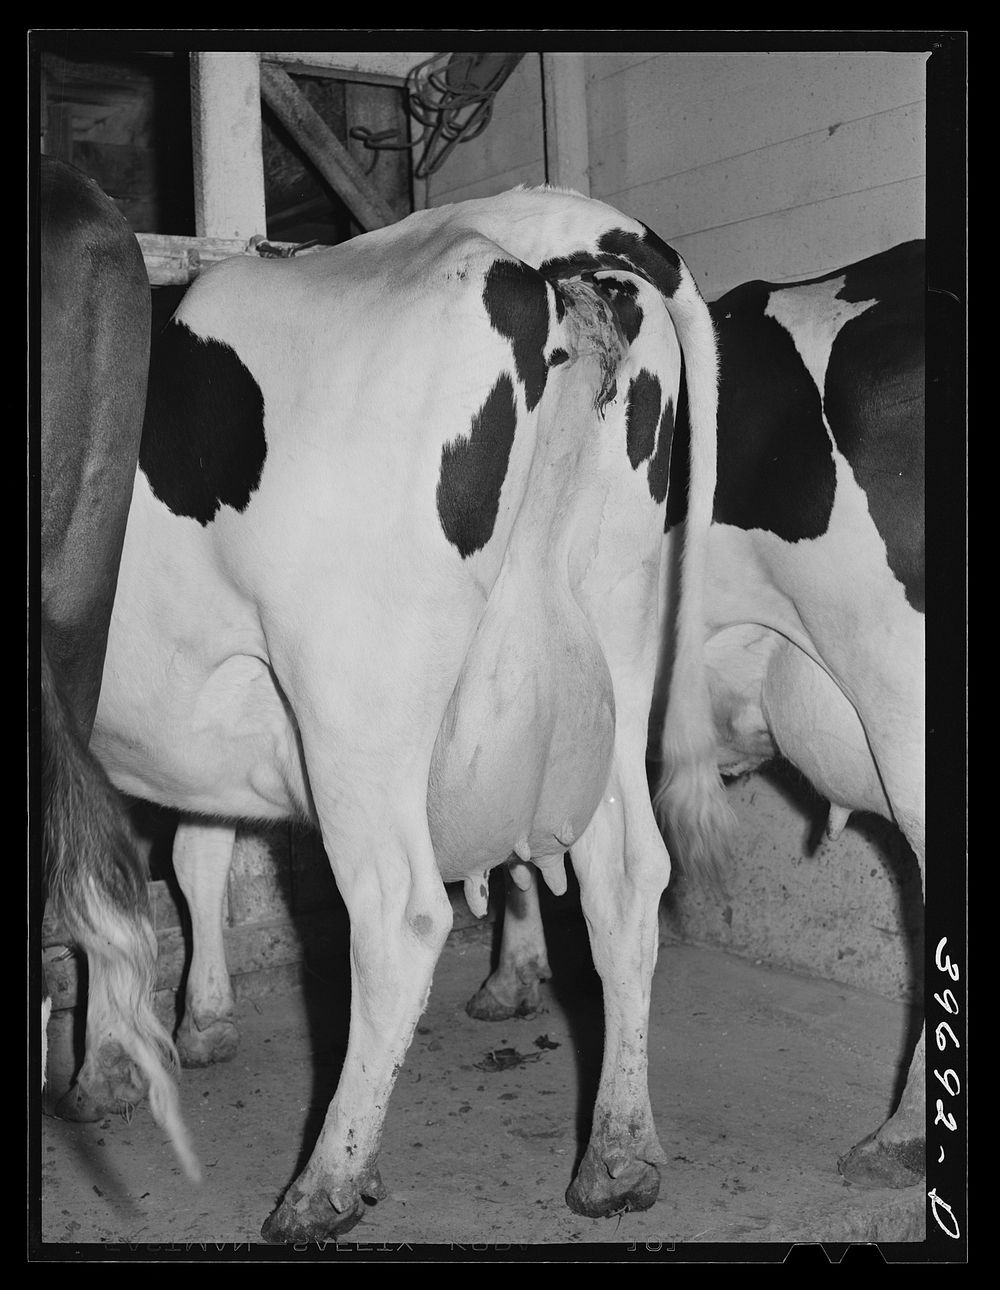 Cows of member of the Dairymen's Cooperative Creamery. Caldwell, Canyon County, Idaho by Russell Lee